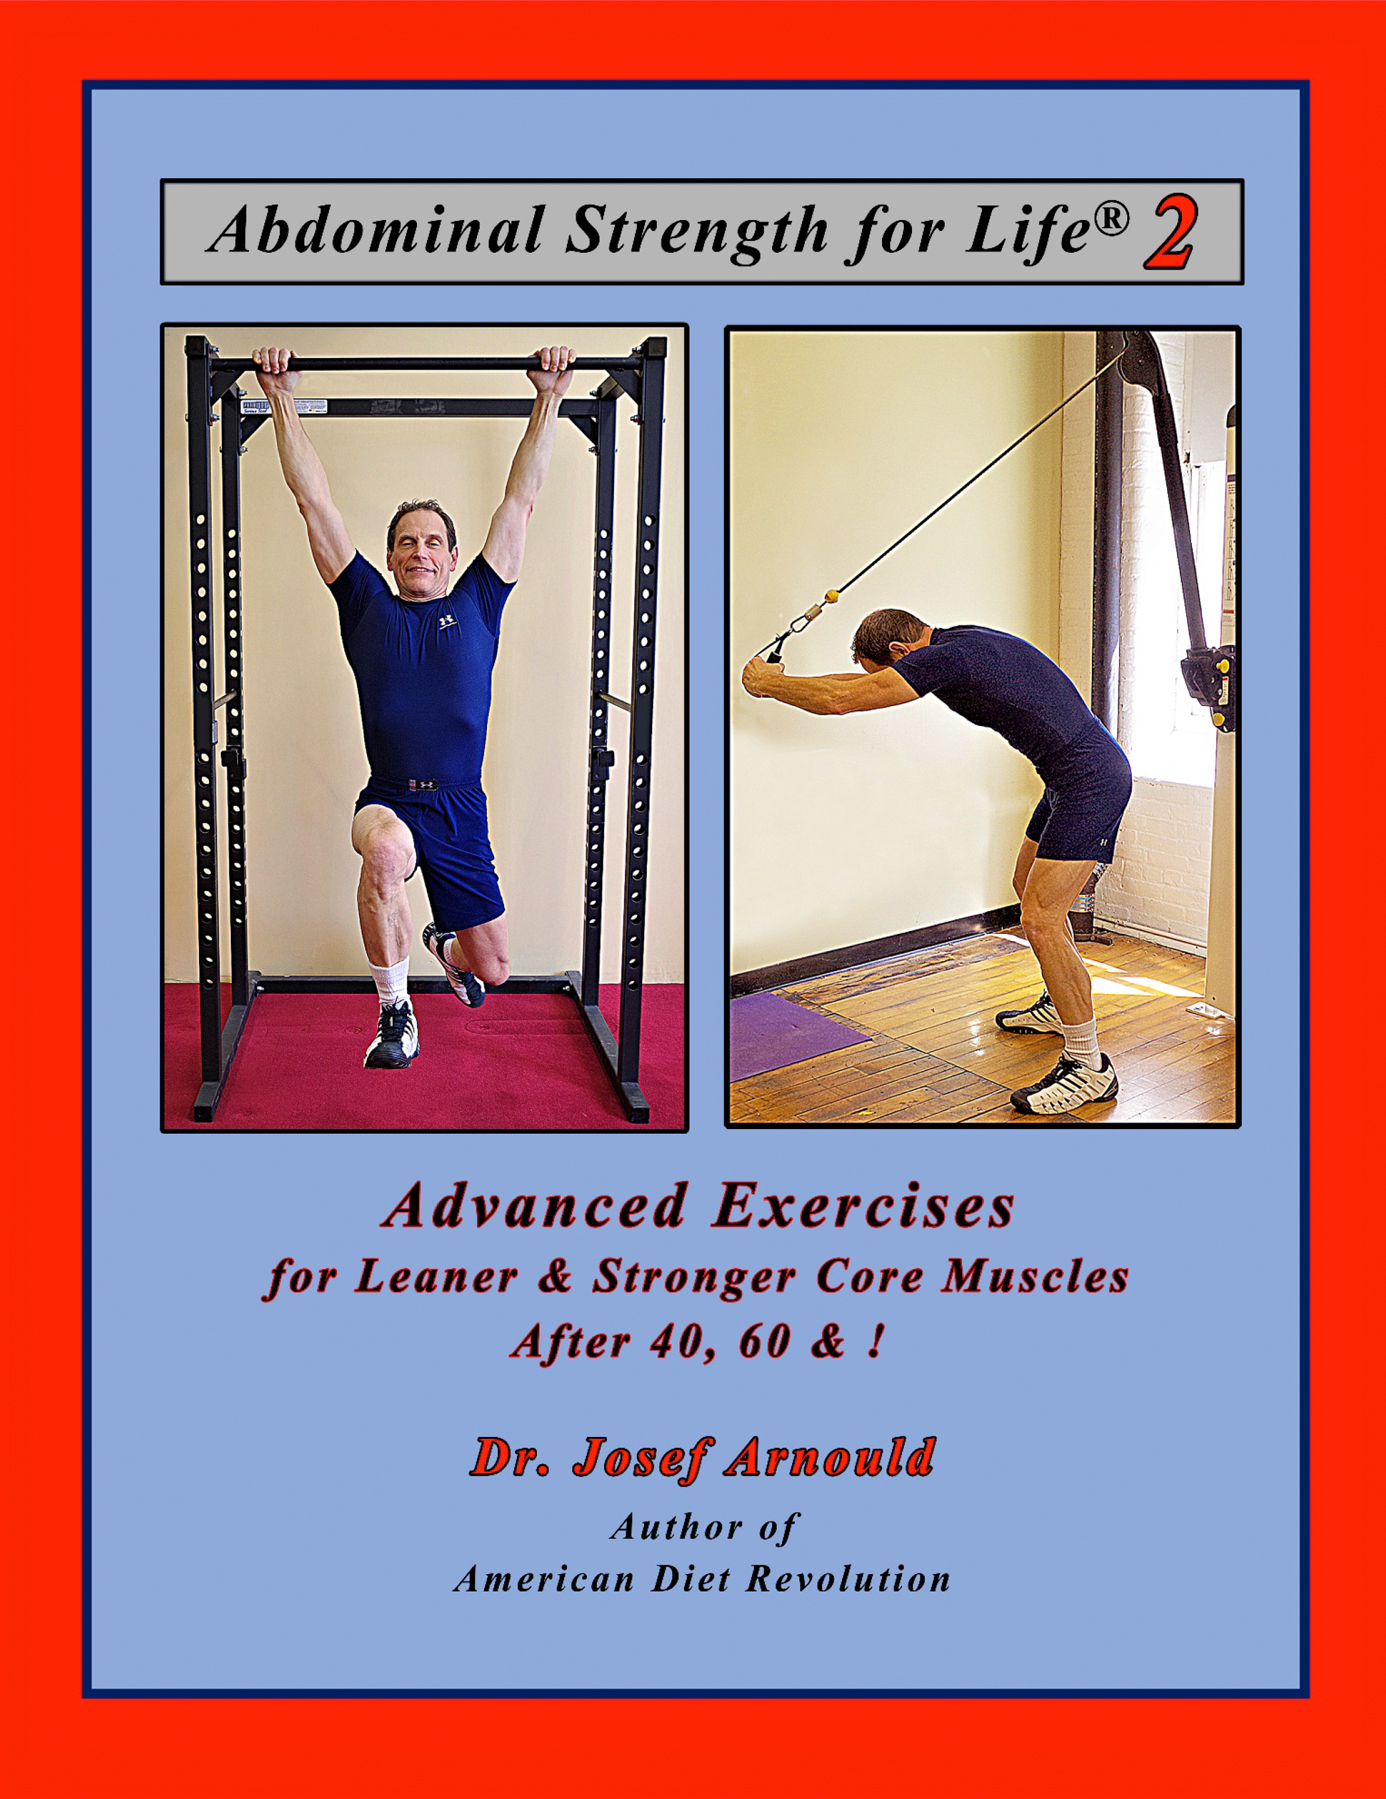 Abdominal Strength for Life2